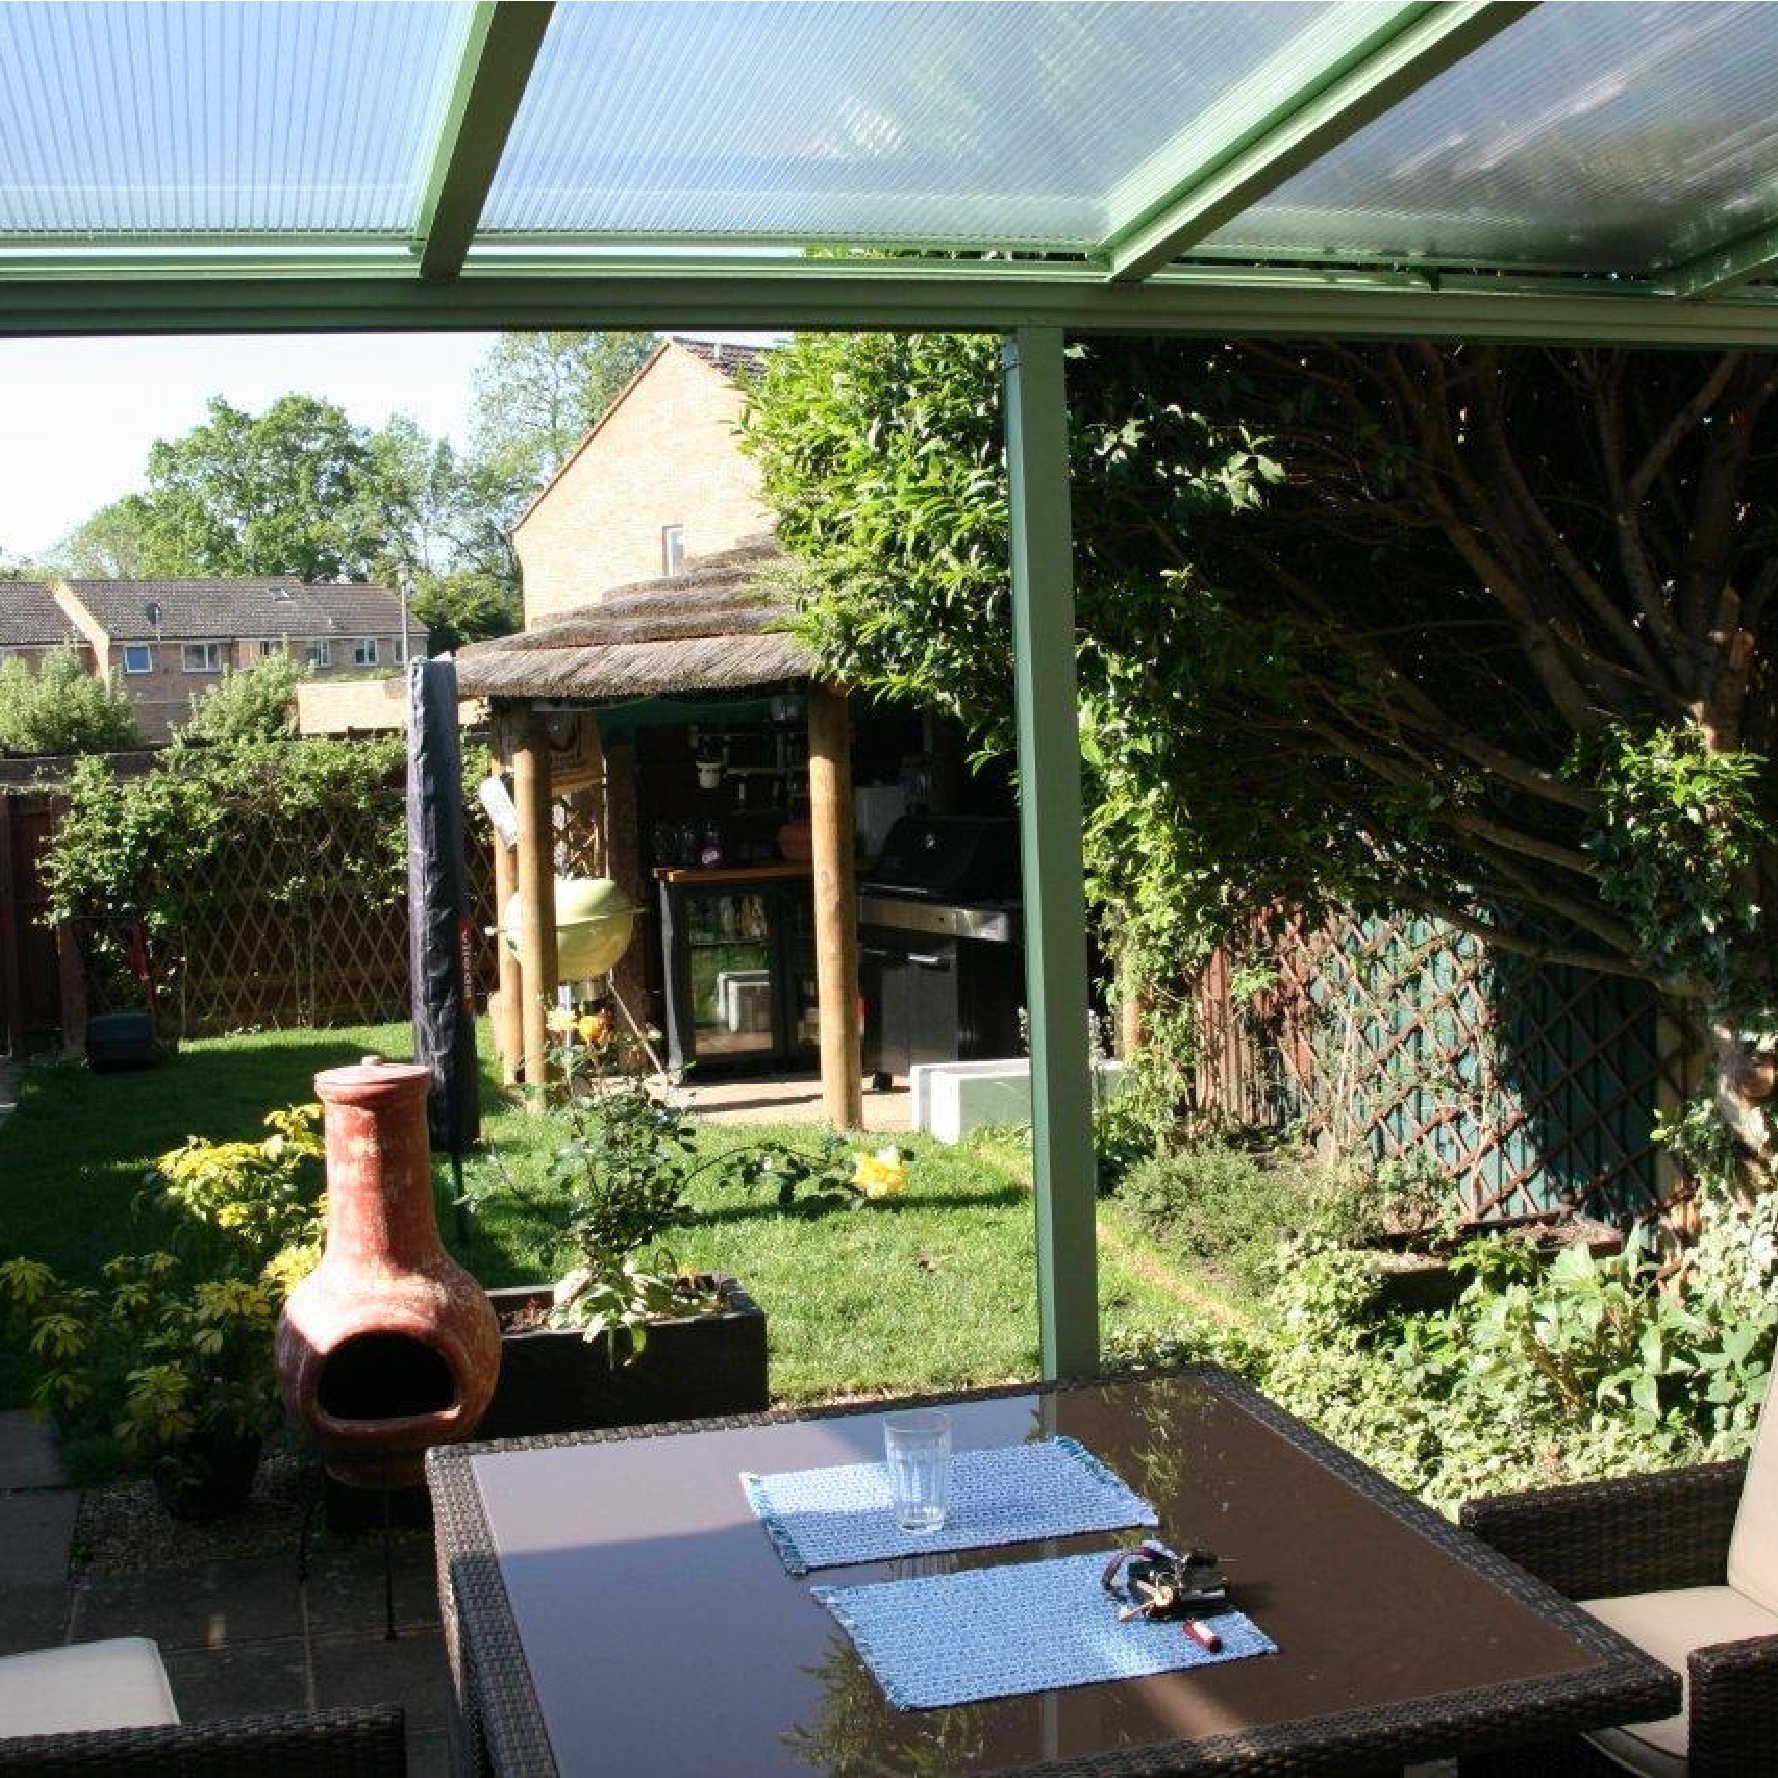 Affordable Omega Smart Lean-To Canopy, White with 16mm Polycarbonate Glazing - 7.4m (W) x 2.0m (P), (4) Supporting Posts